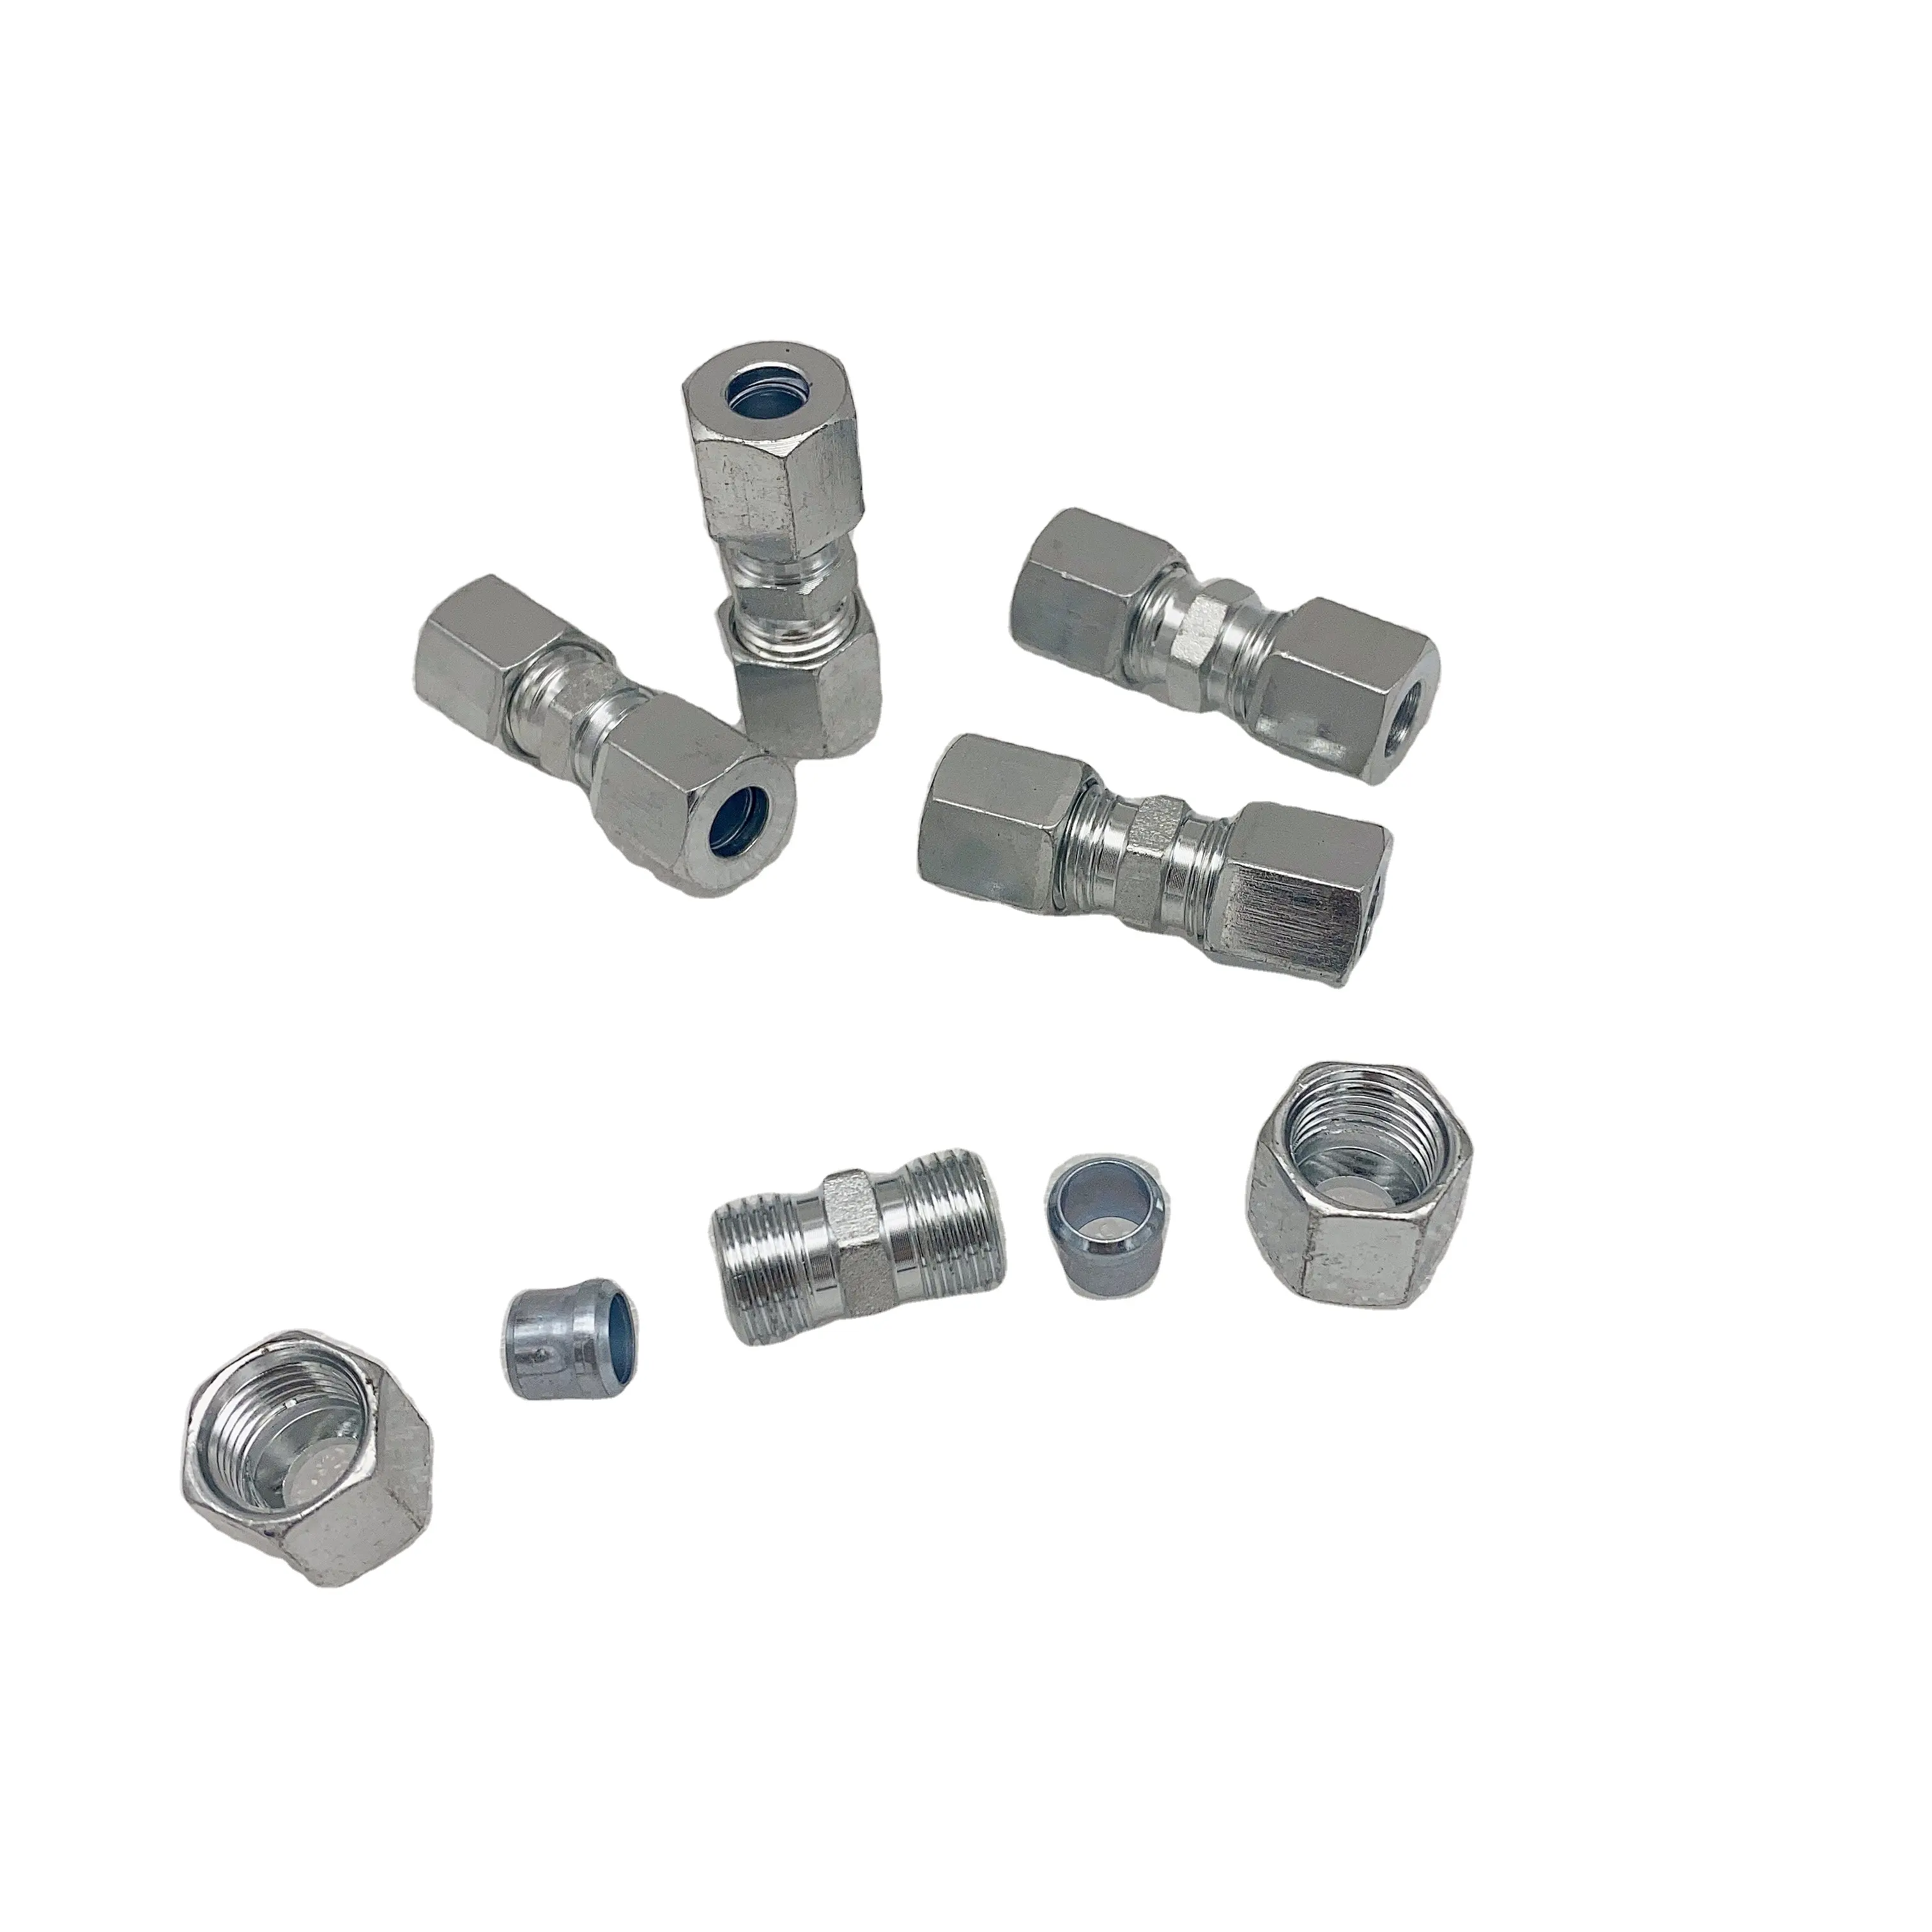 High Pressure Air Brake Hose Tube Fitting stainless steel pipe fittings metric compression hydraulic union fittings